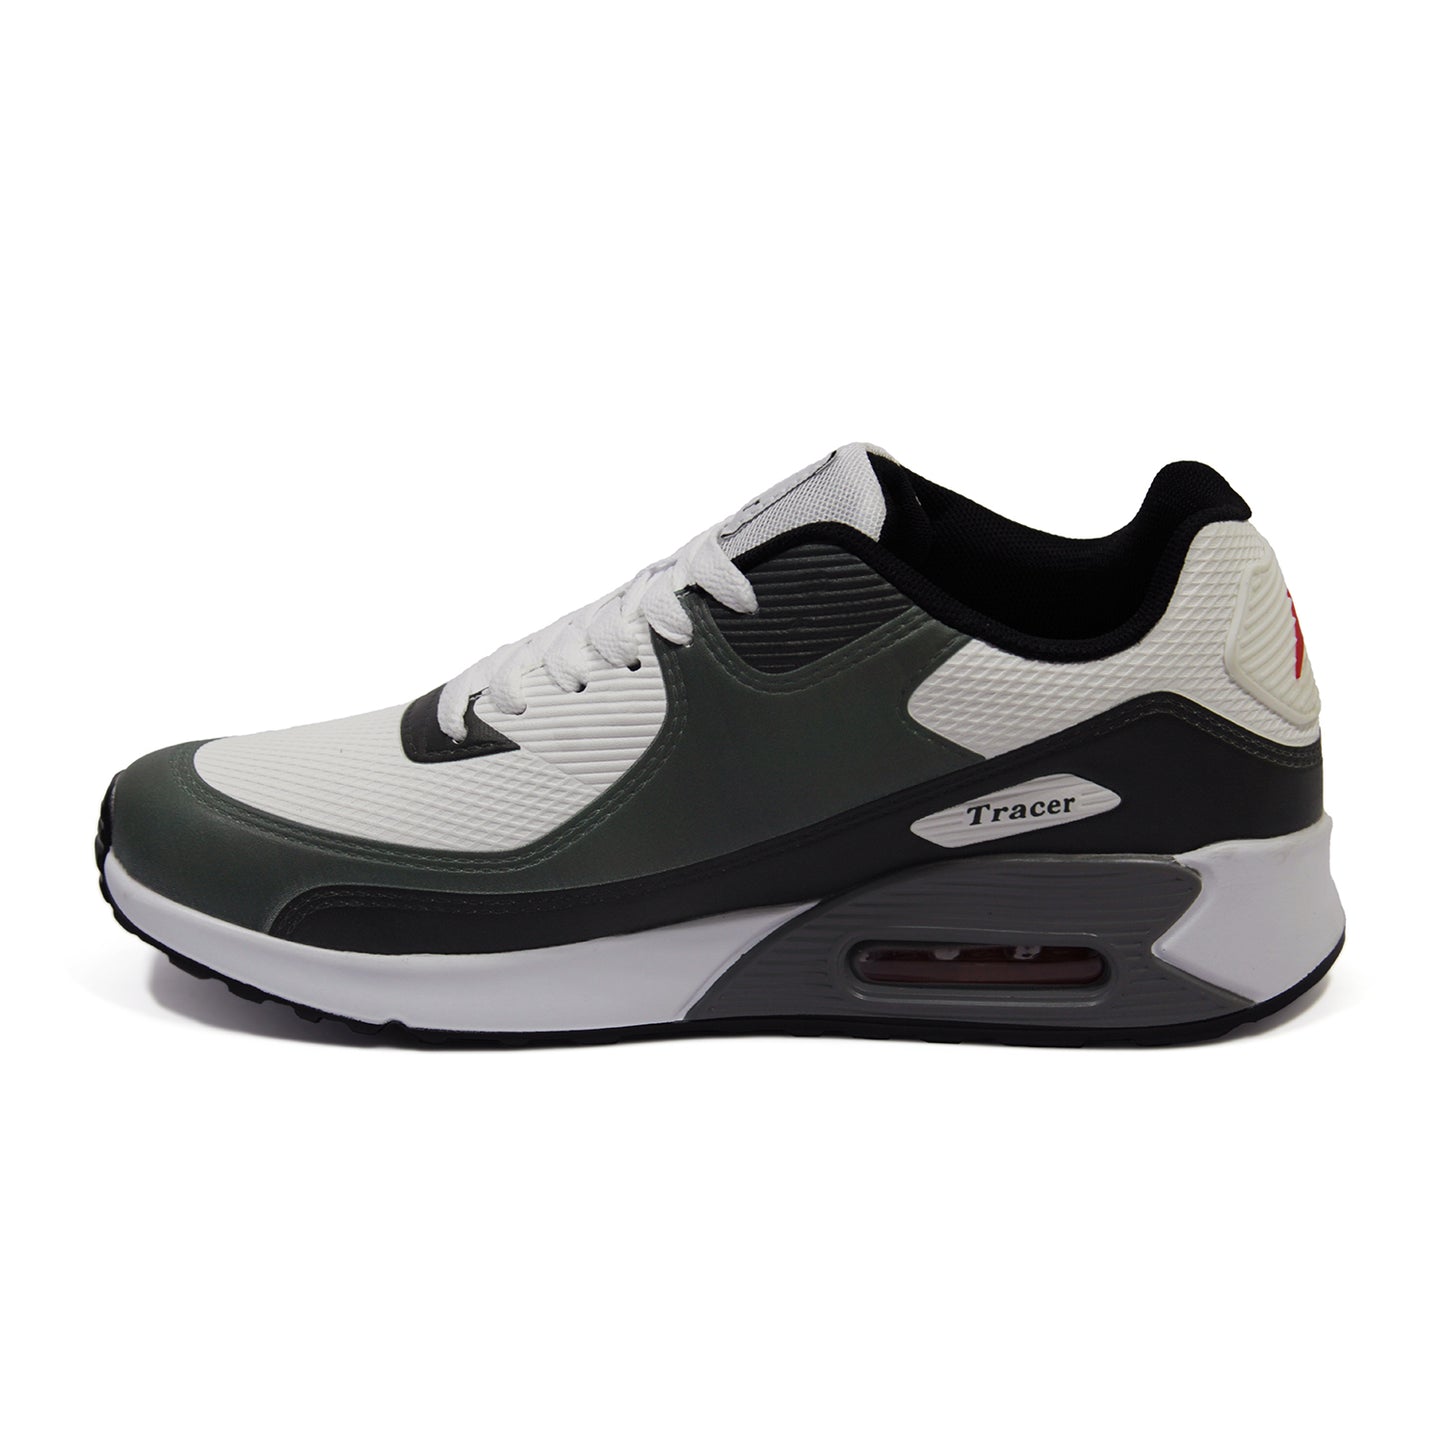 Tracer Shoes | White Grey | Men's Collection